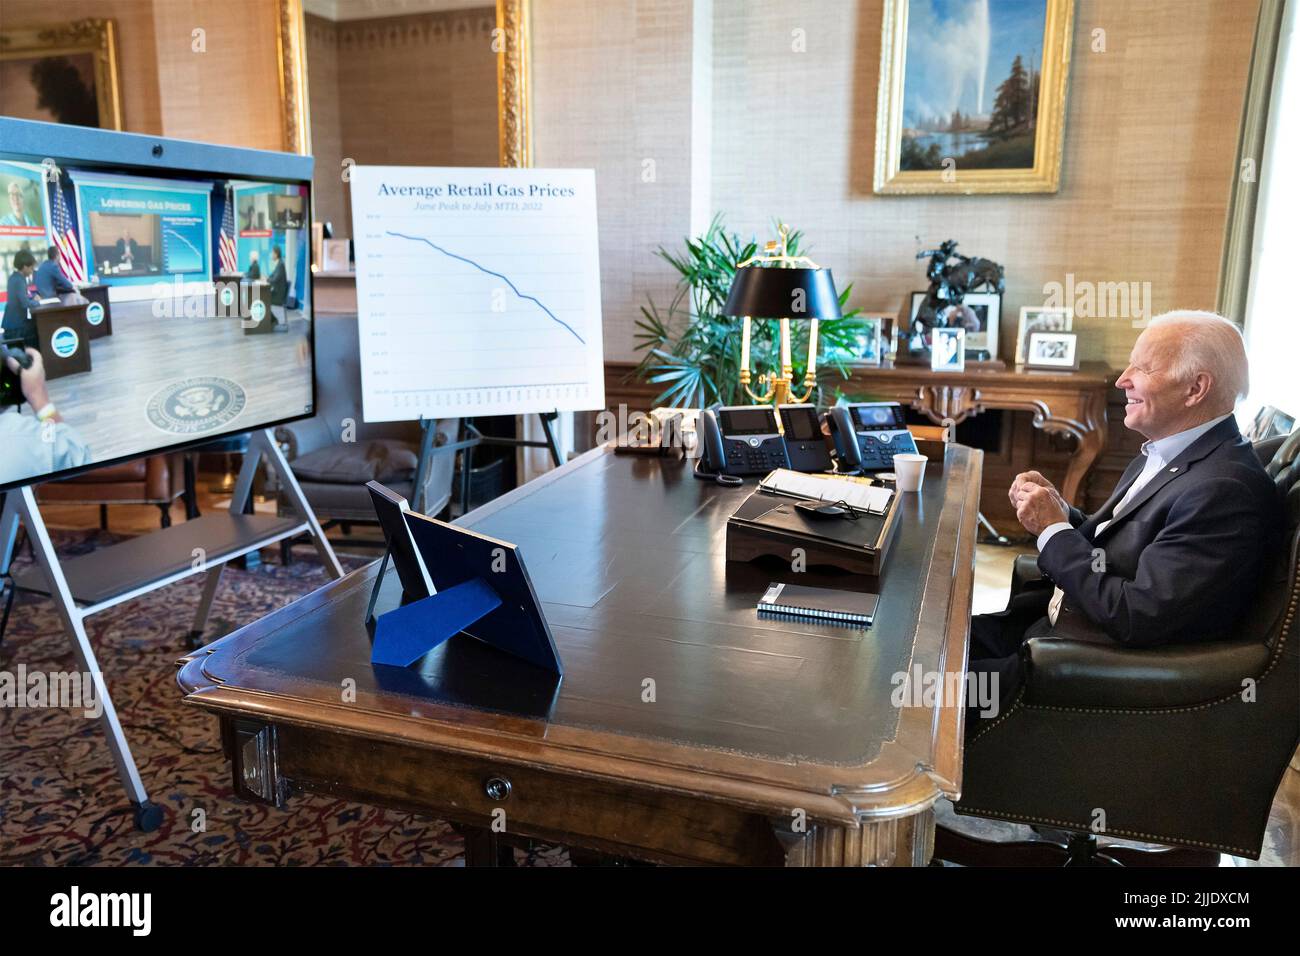 Washington, United States Of America. 22nd July, 2022. Washington, United States of America. 22 July, 2022. U.S President Joe Biden, takes part in a video conference on the drop in gasoline prices as he continues to quarantine after testing positive for COVID-19, at his private office in the residence of the White House, July 22, 2022, in Washington, DC. Credit: Adam Schultz/White House Photo/Alamy Live News Stock Photo